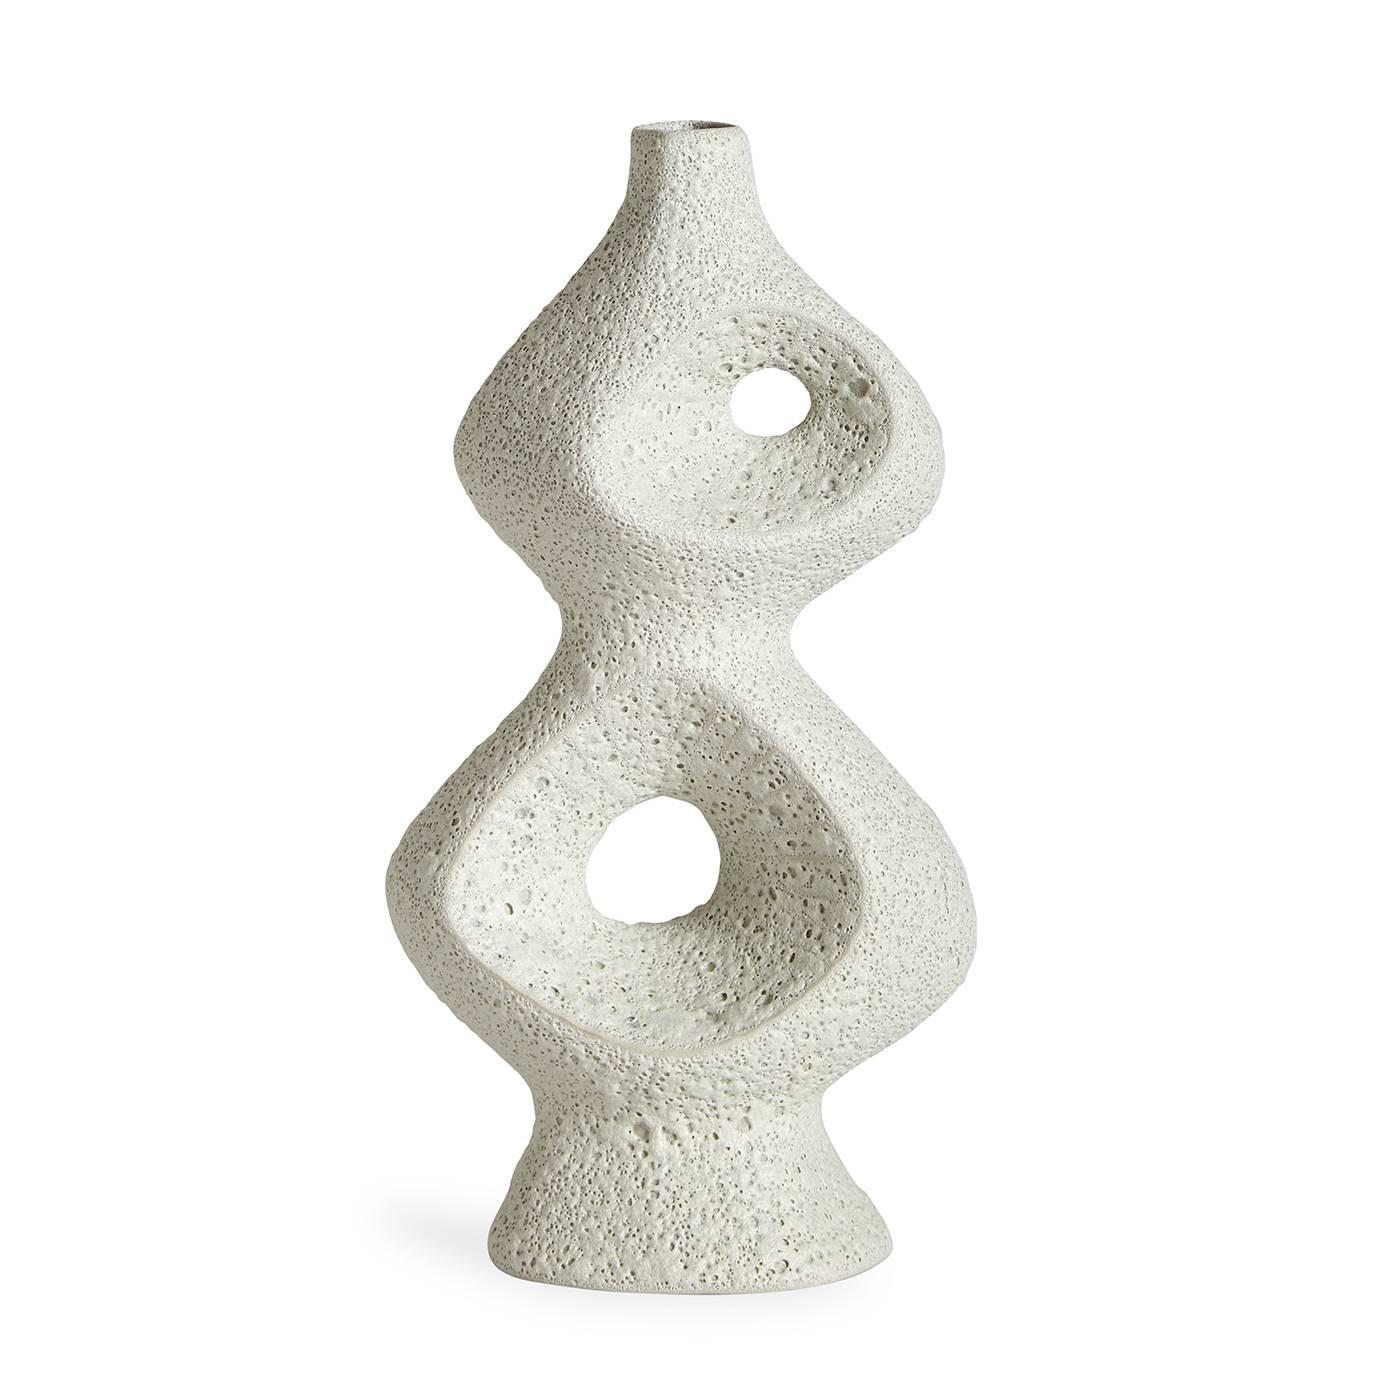 Softly sculptural. Inspired by the soaring organic modernist architecture of Le Corbusier's Ronchamp chapel, these vases feature soft curves accentuated with a deep and bubbly, white lava glaze. They're intriguing at every angle. Our Ronchamp Claude